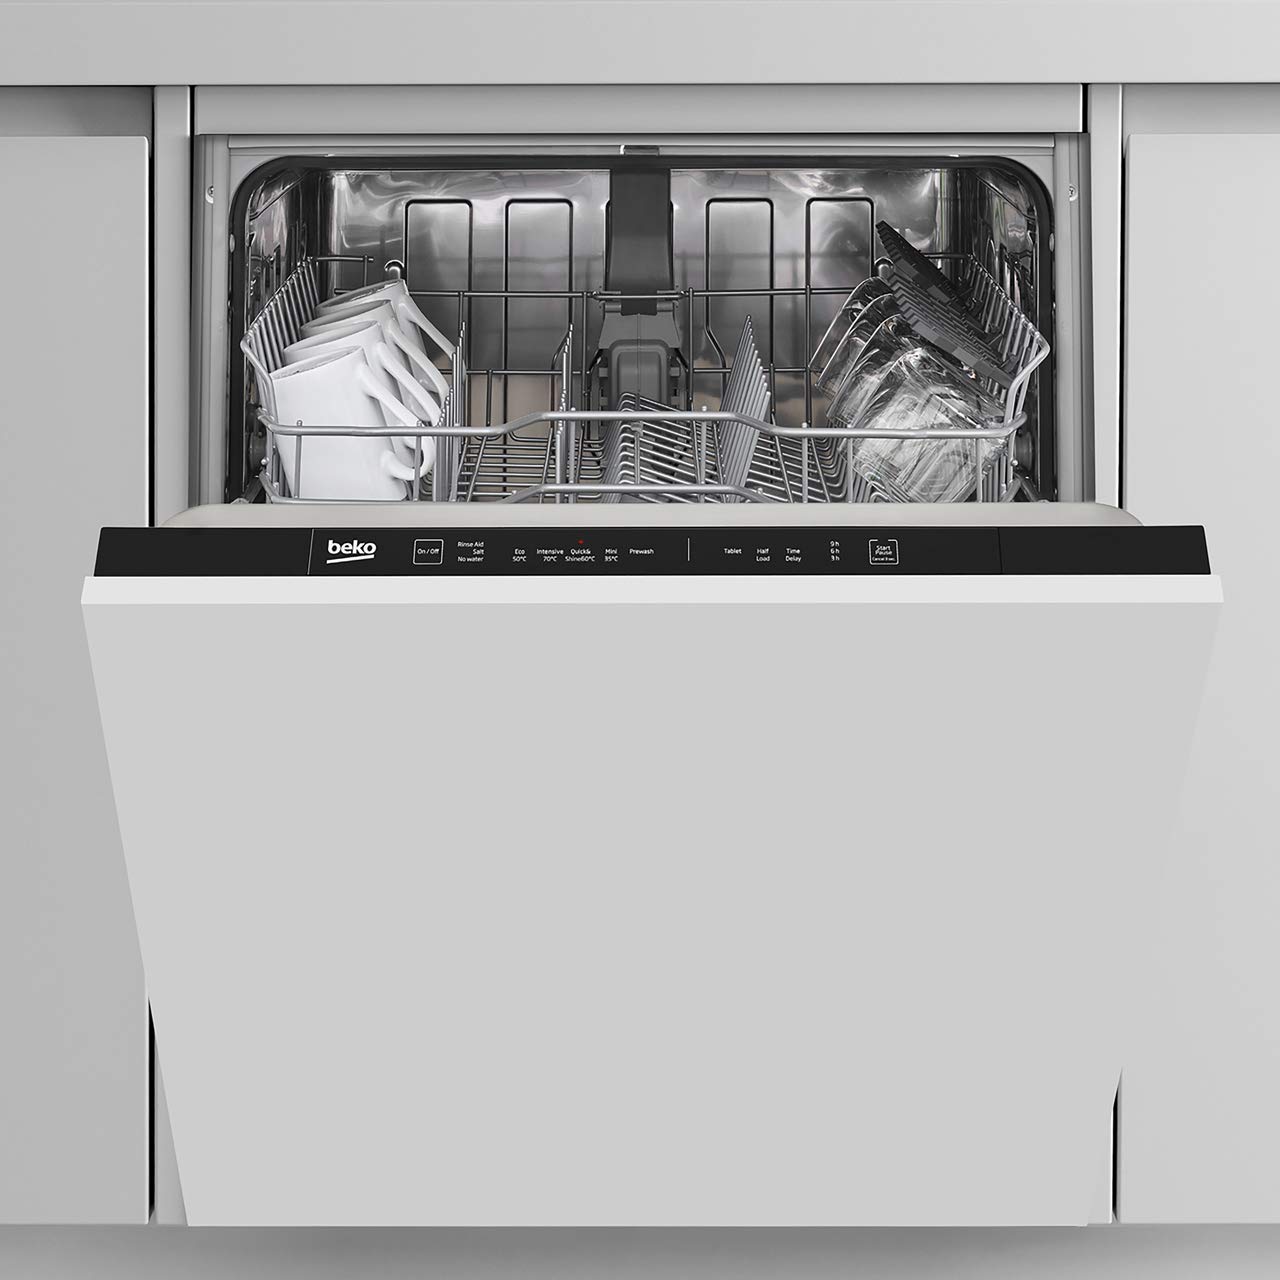 Beko DIN15R11, Dishwashers Reviews and 